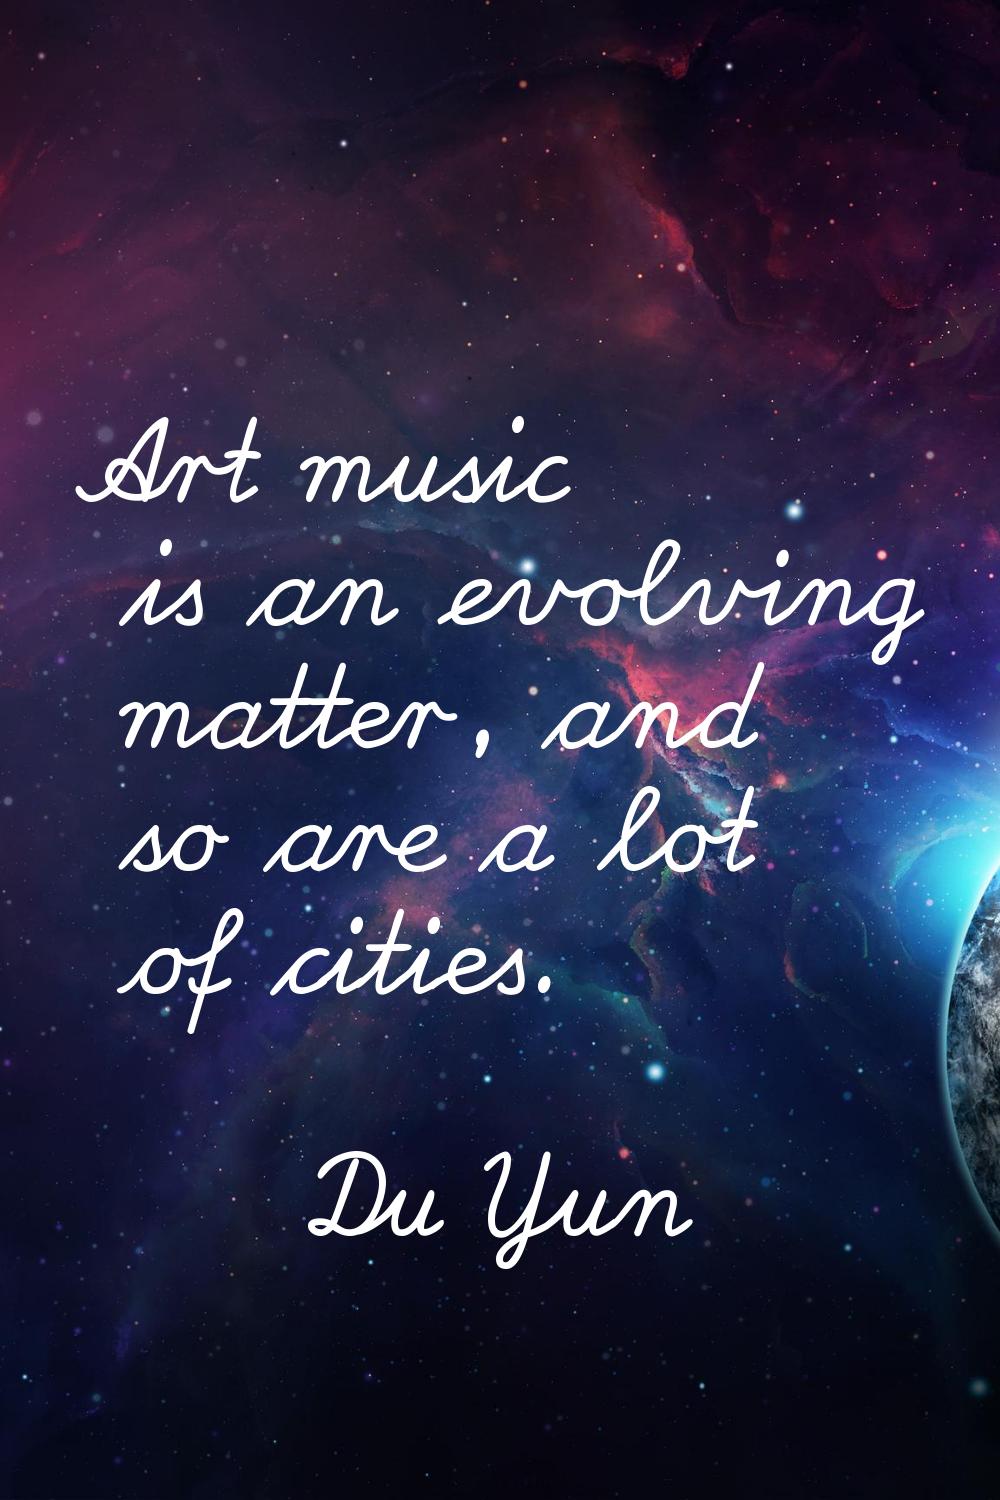 Art music is an evolving matter, and so are a lot of cities.